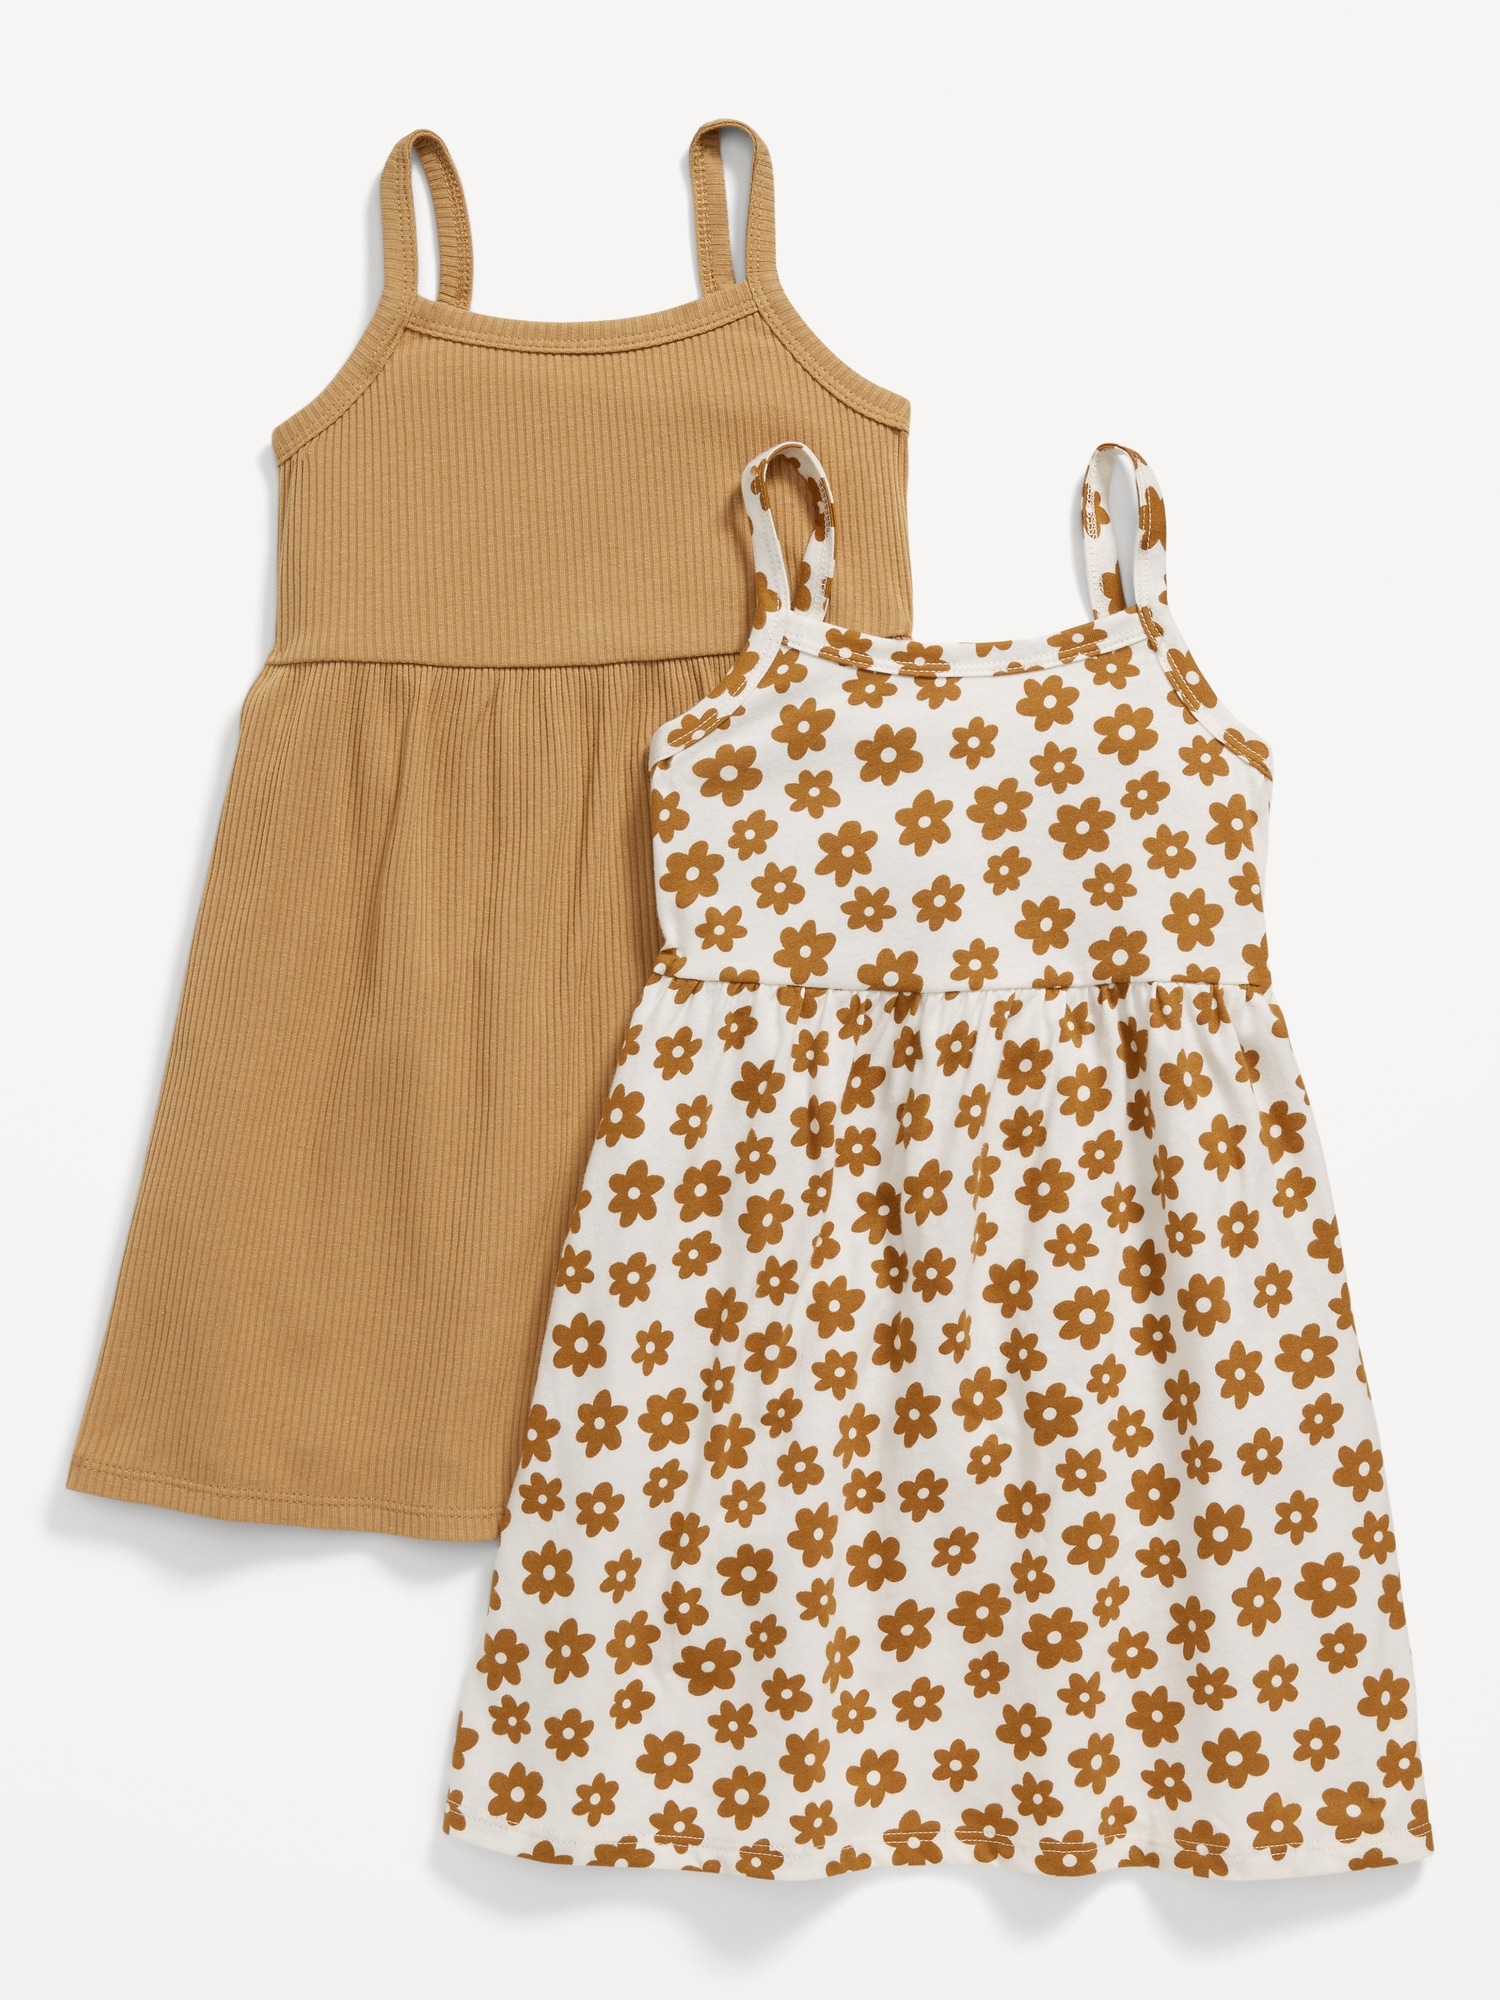 Sleeveless Fit and Flare Dress 2-Pack for Toddler Girls